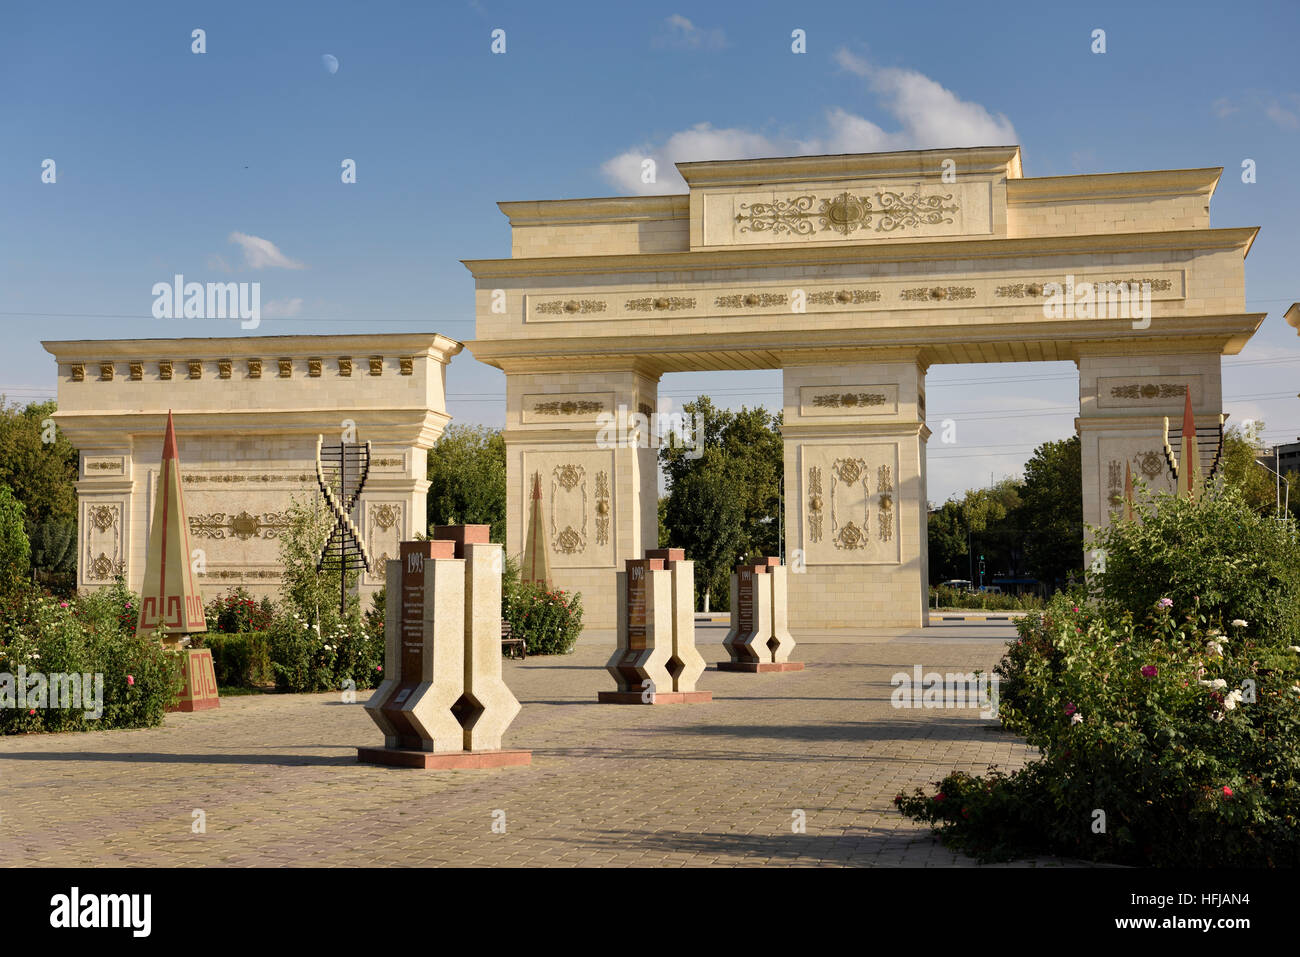 Ornate gates to Independence Park Shymkent Kazakhstan with granite steles with 20 years history 1991 to 2011 Stock Photo